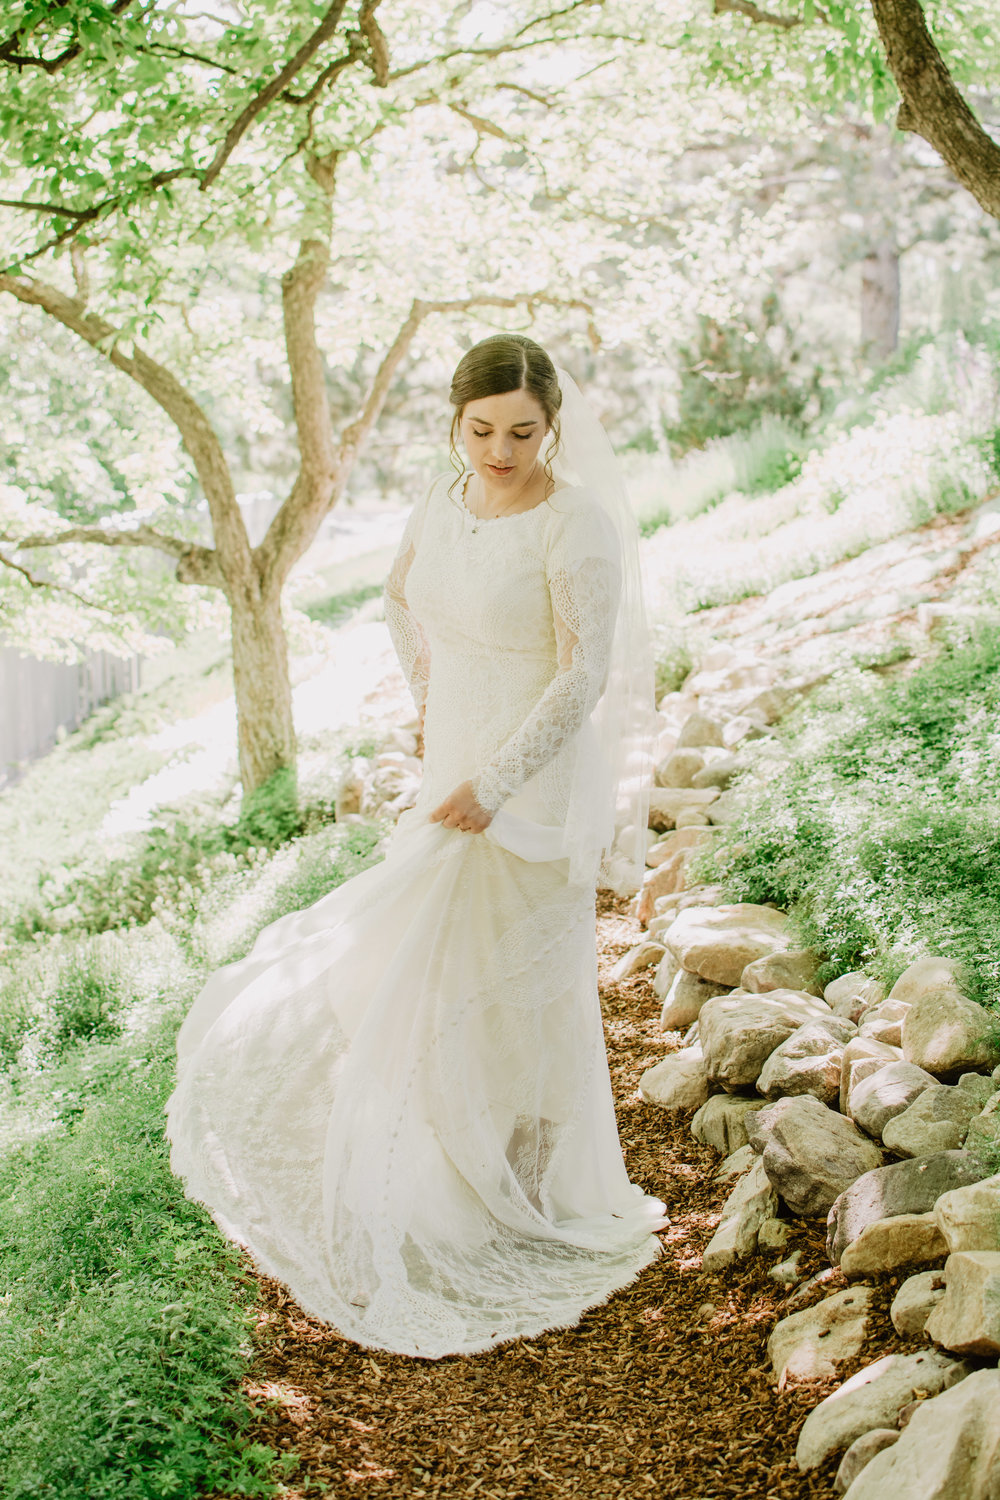 Jocilyn Bennett Photography | Utah Bride | LDS Bride | Utah Wedding Photography | When Two Become One | LDS civil wedding ceremony | Blending religions in families | Capturing Raw and Genuine Emotion | Combining Traditions | LDS Logan Temple | Temple Sealing | Pictures of the Bride | Lace Dress | Bridals |